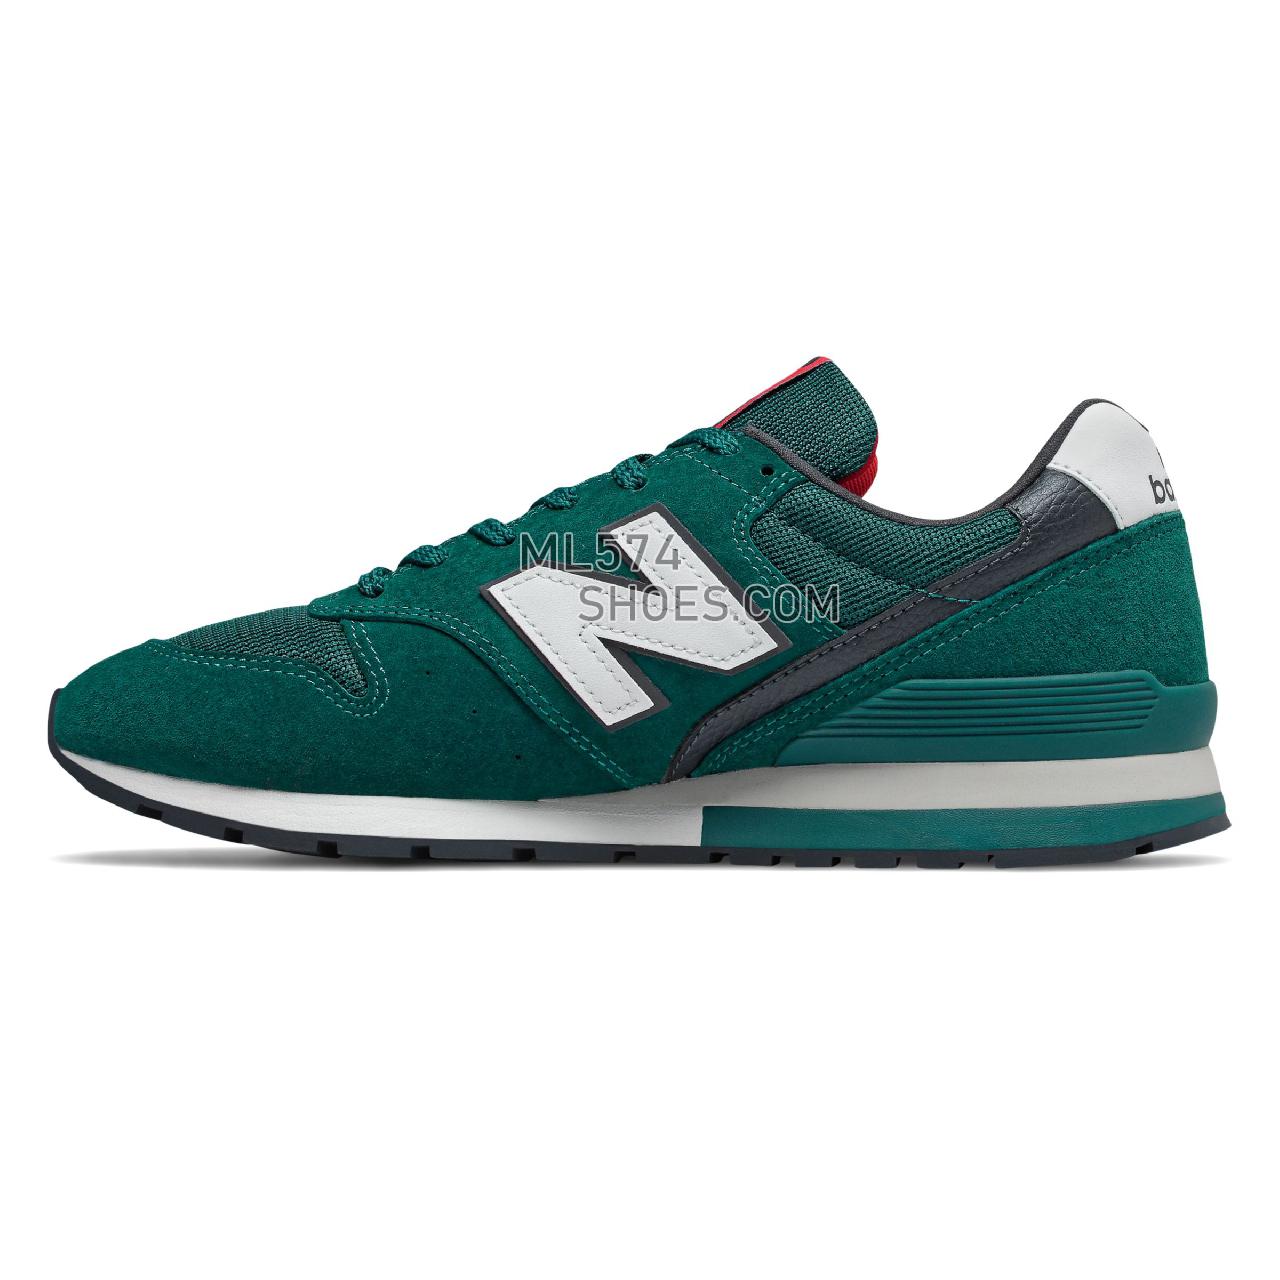 New Balance 996 - Men's 996 Classic CM996V2-27575-M - Tropical Green with Eclipse - CM996RB